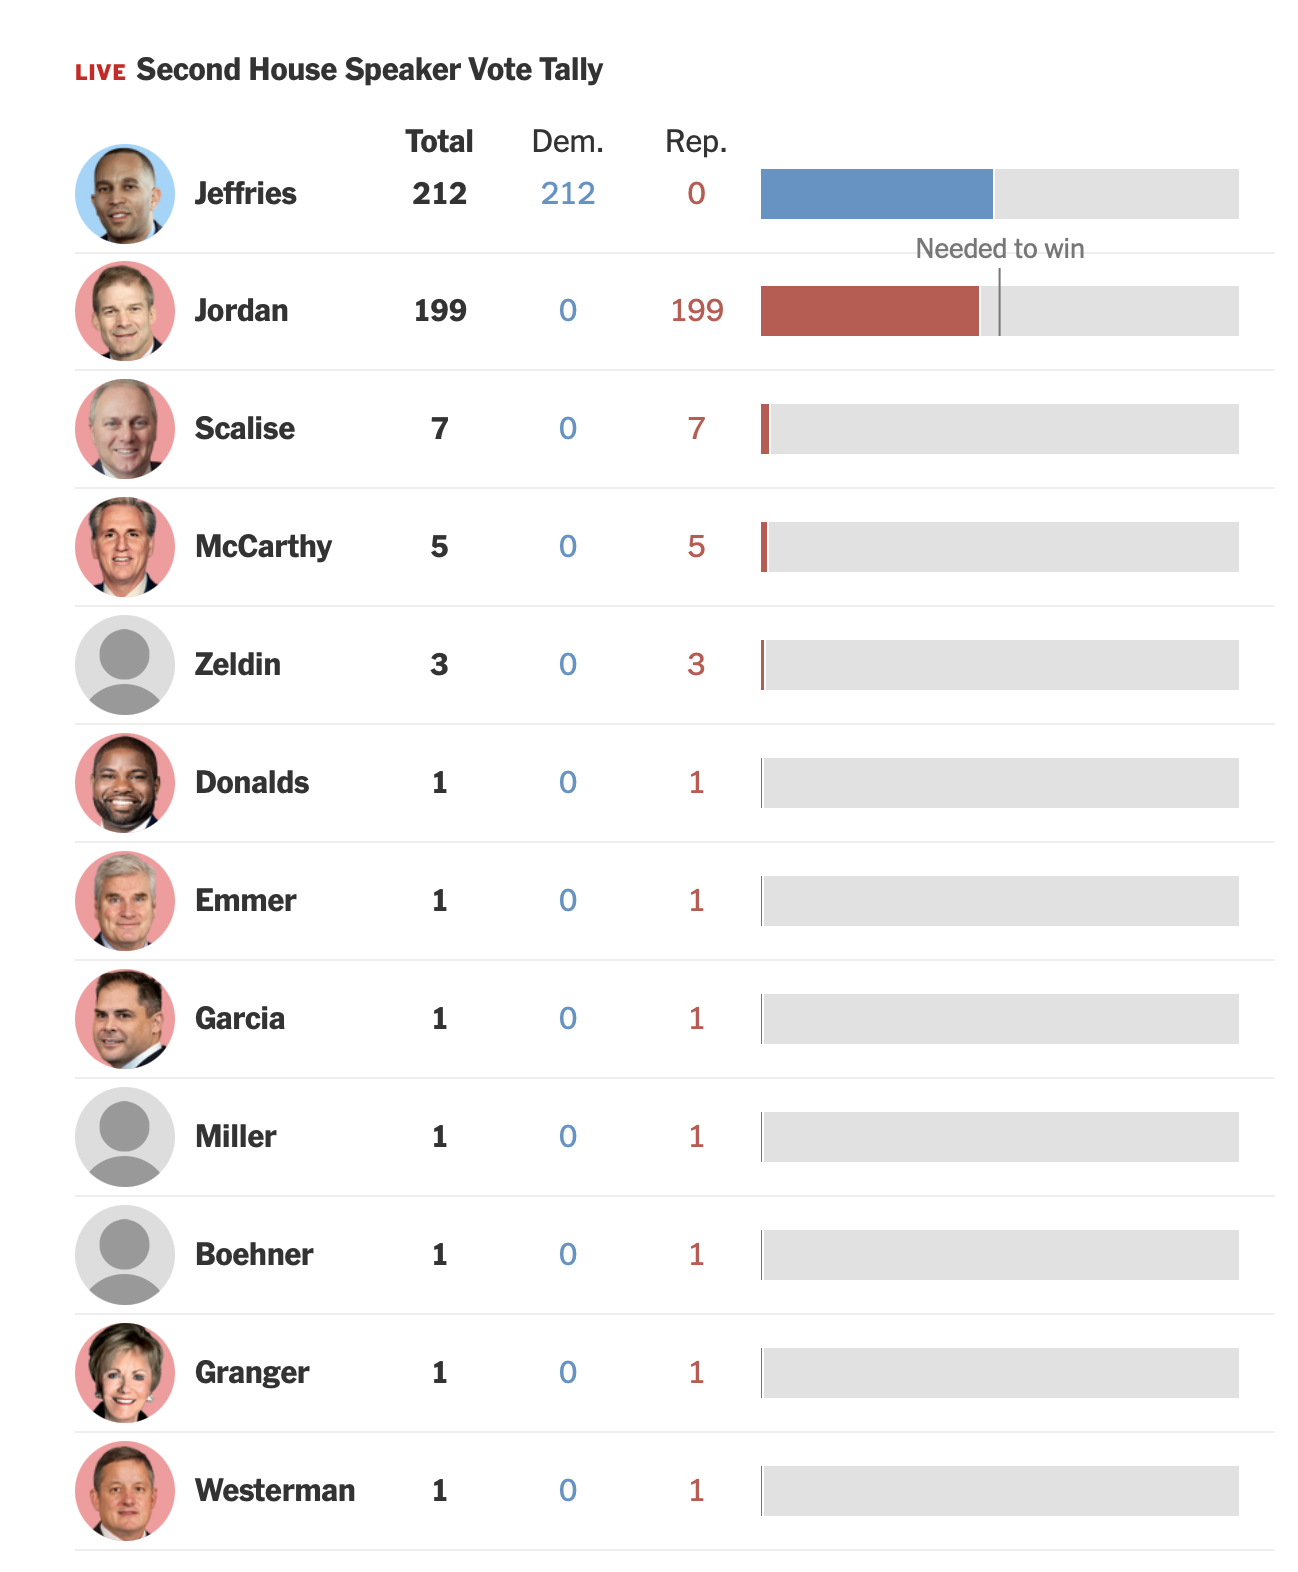 screenshot of the New York Times live house speaker vote tally, doctored to show Jeffries at the top, reflecting his getting the most votes.